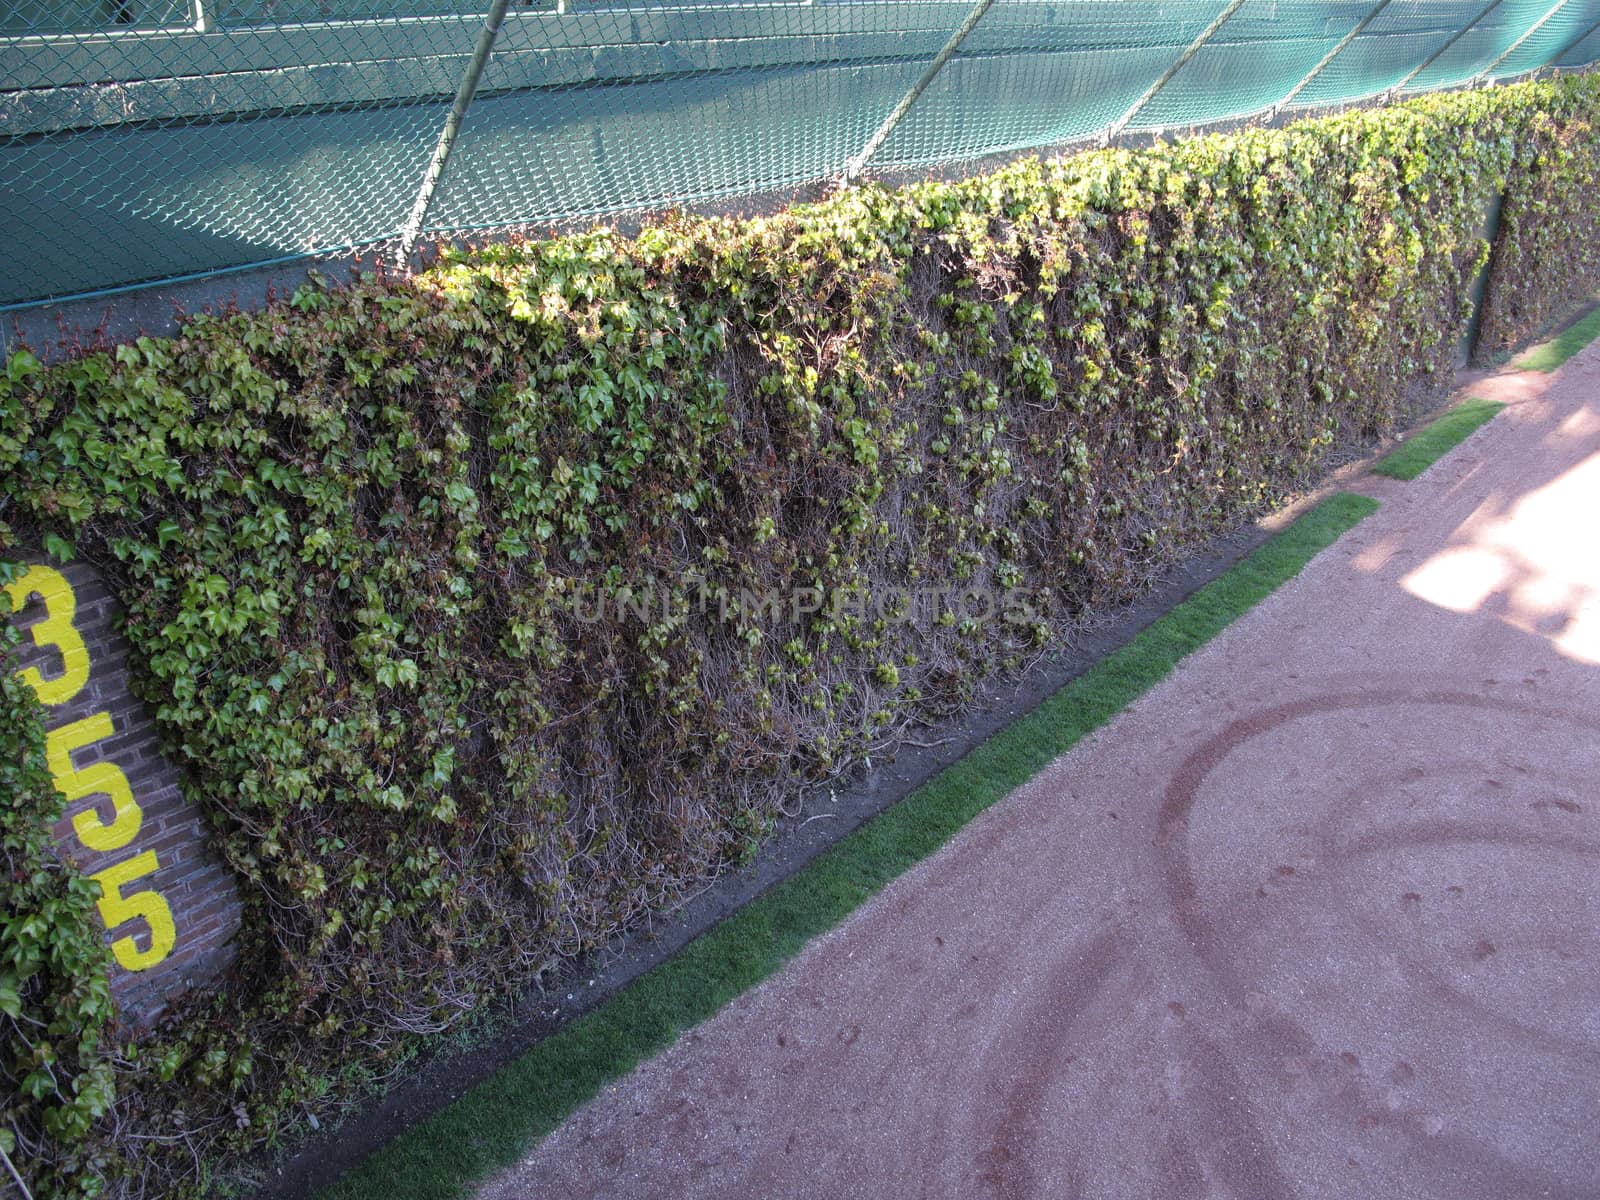 Famous ivy covered outfield wall at Wrigley Field, home of the Chicago Cubs.